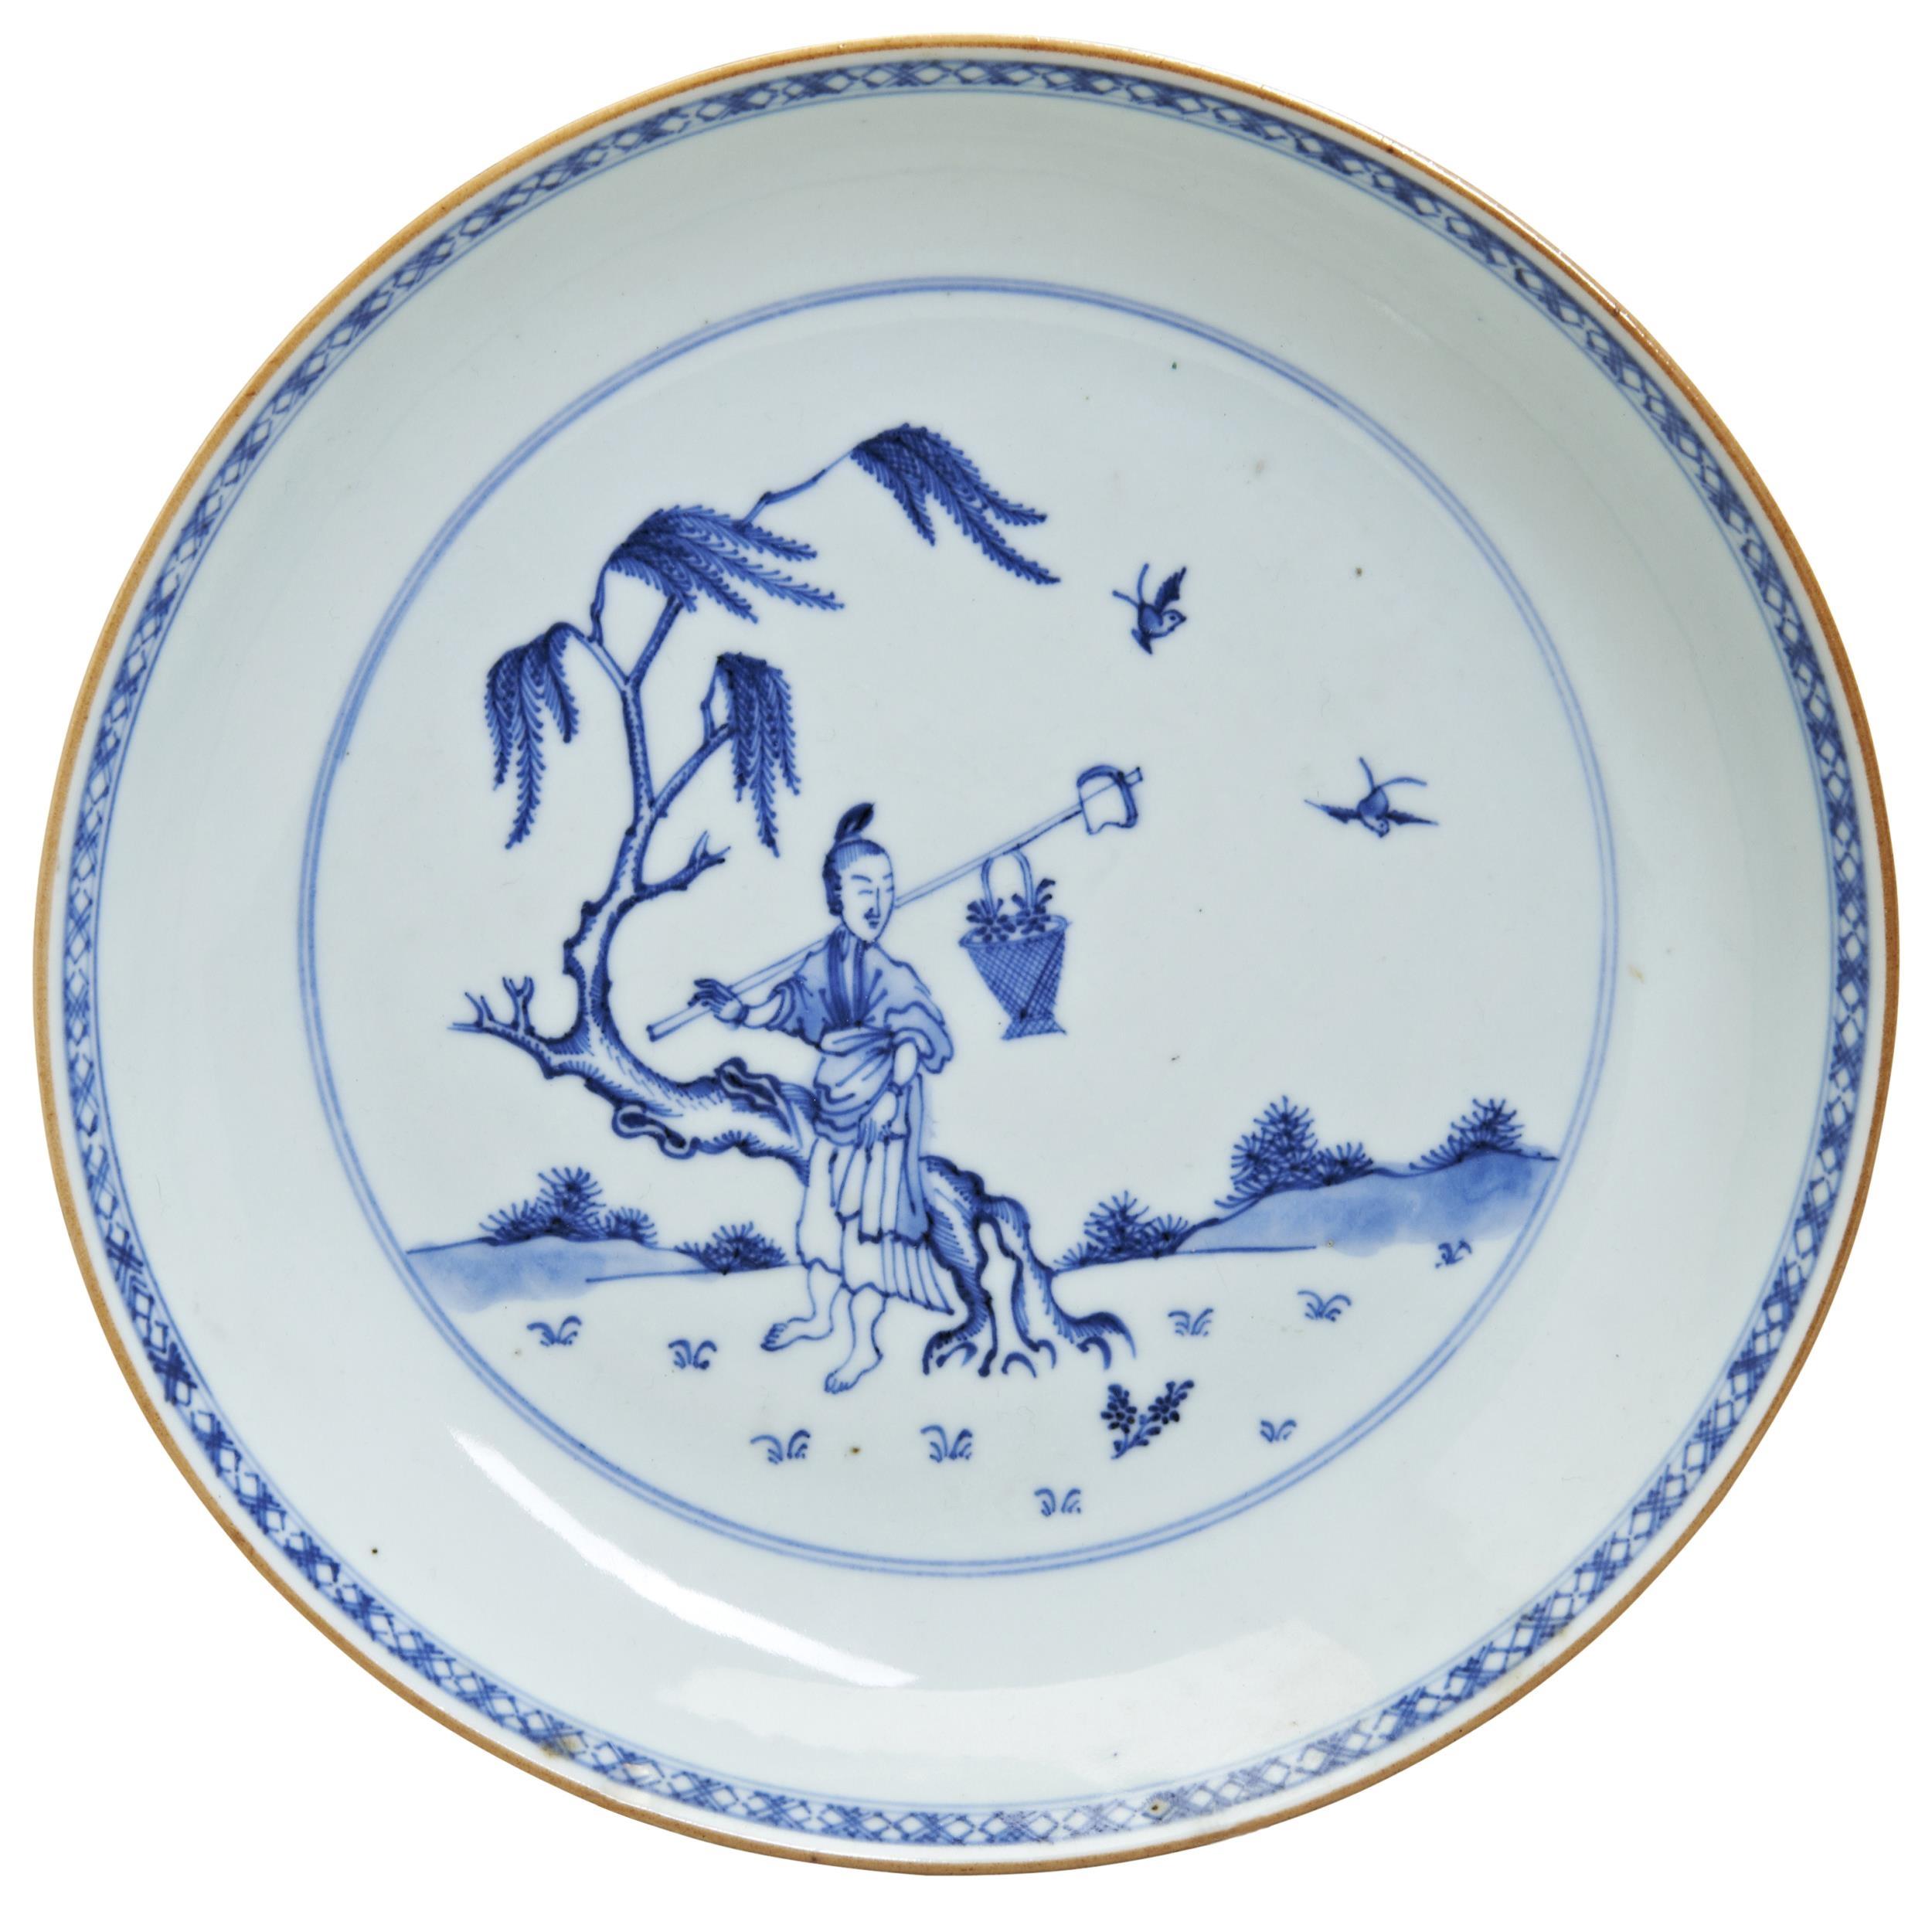 A BLUE AND WHITE DISH QING DYNASTY, 18TH CENTURY fienly painted with a figure seated beneath a